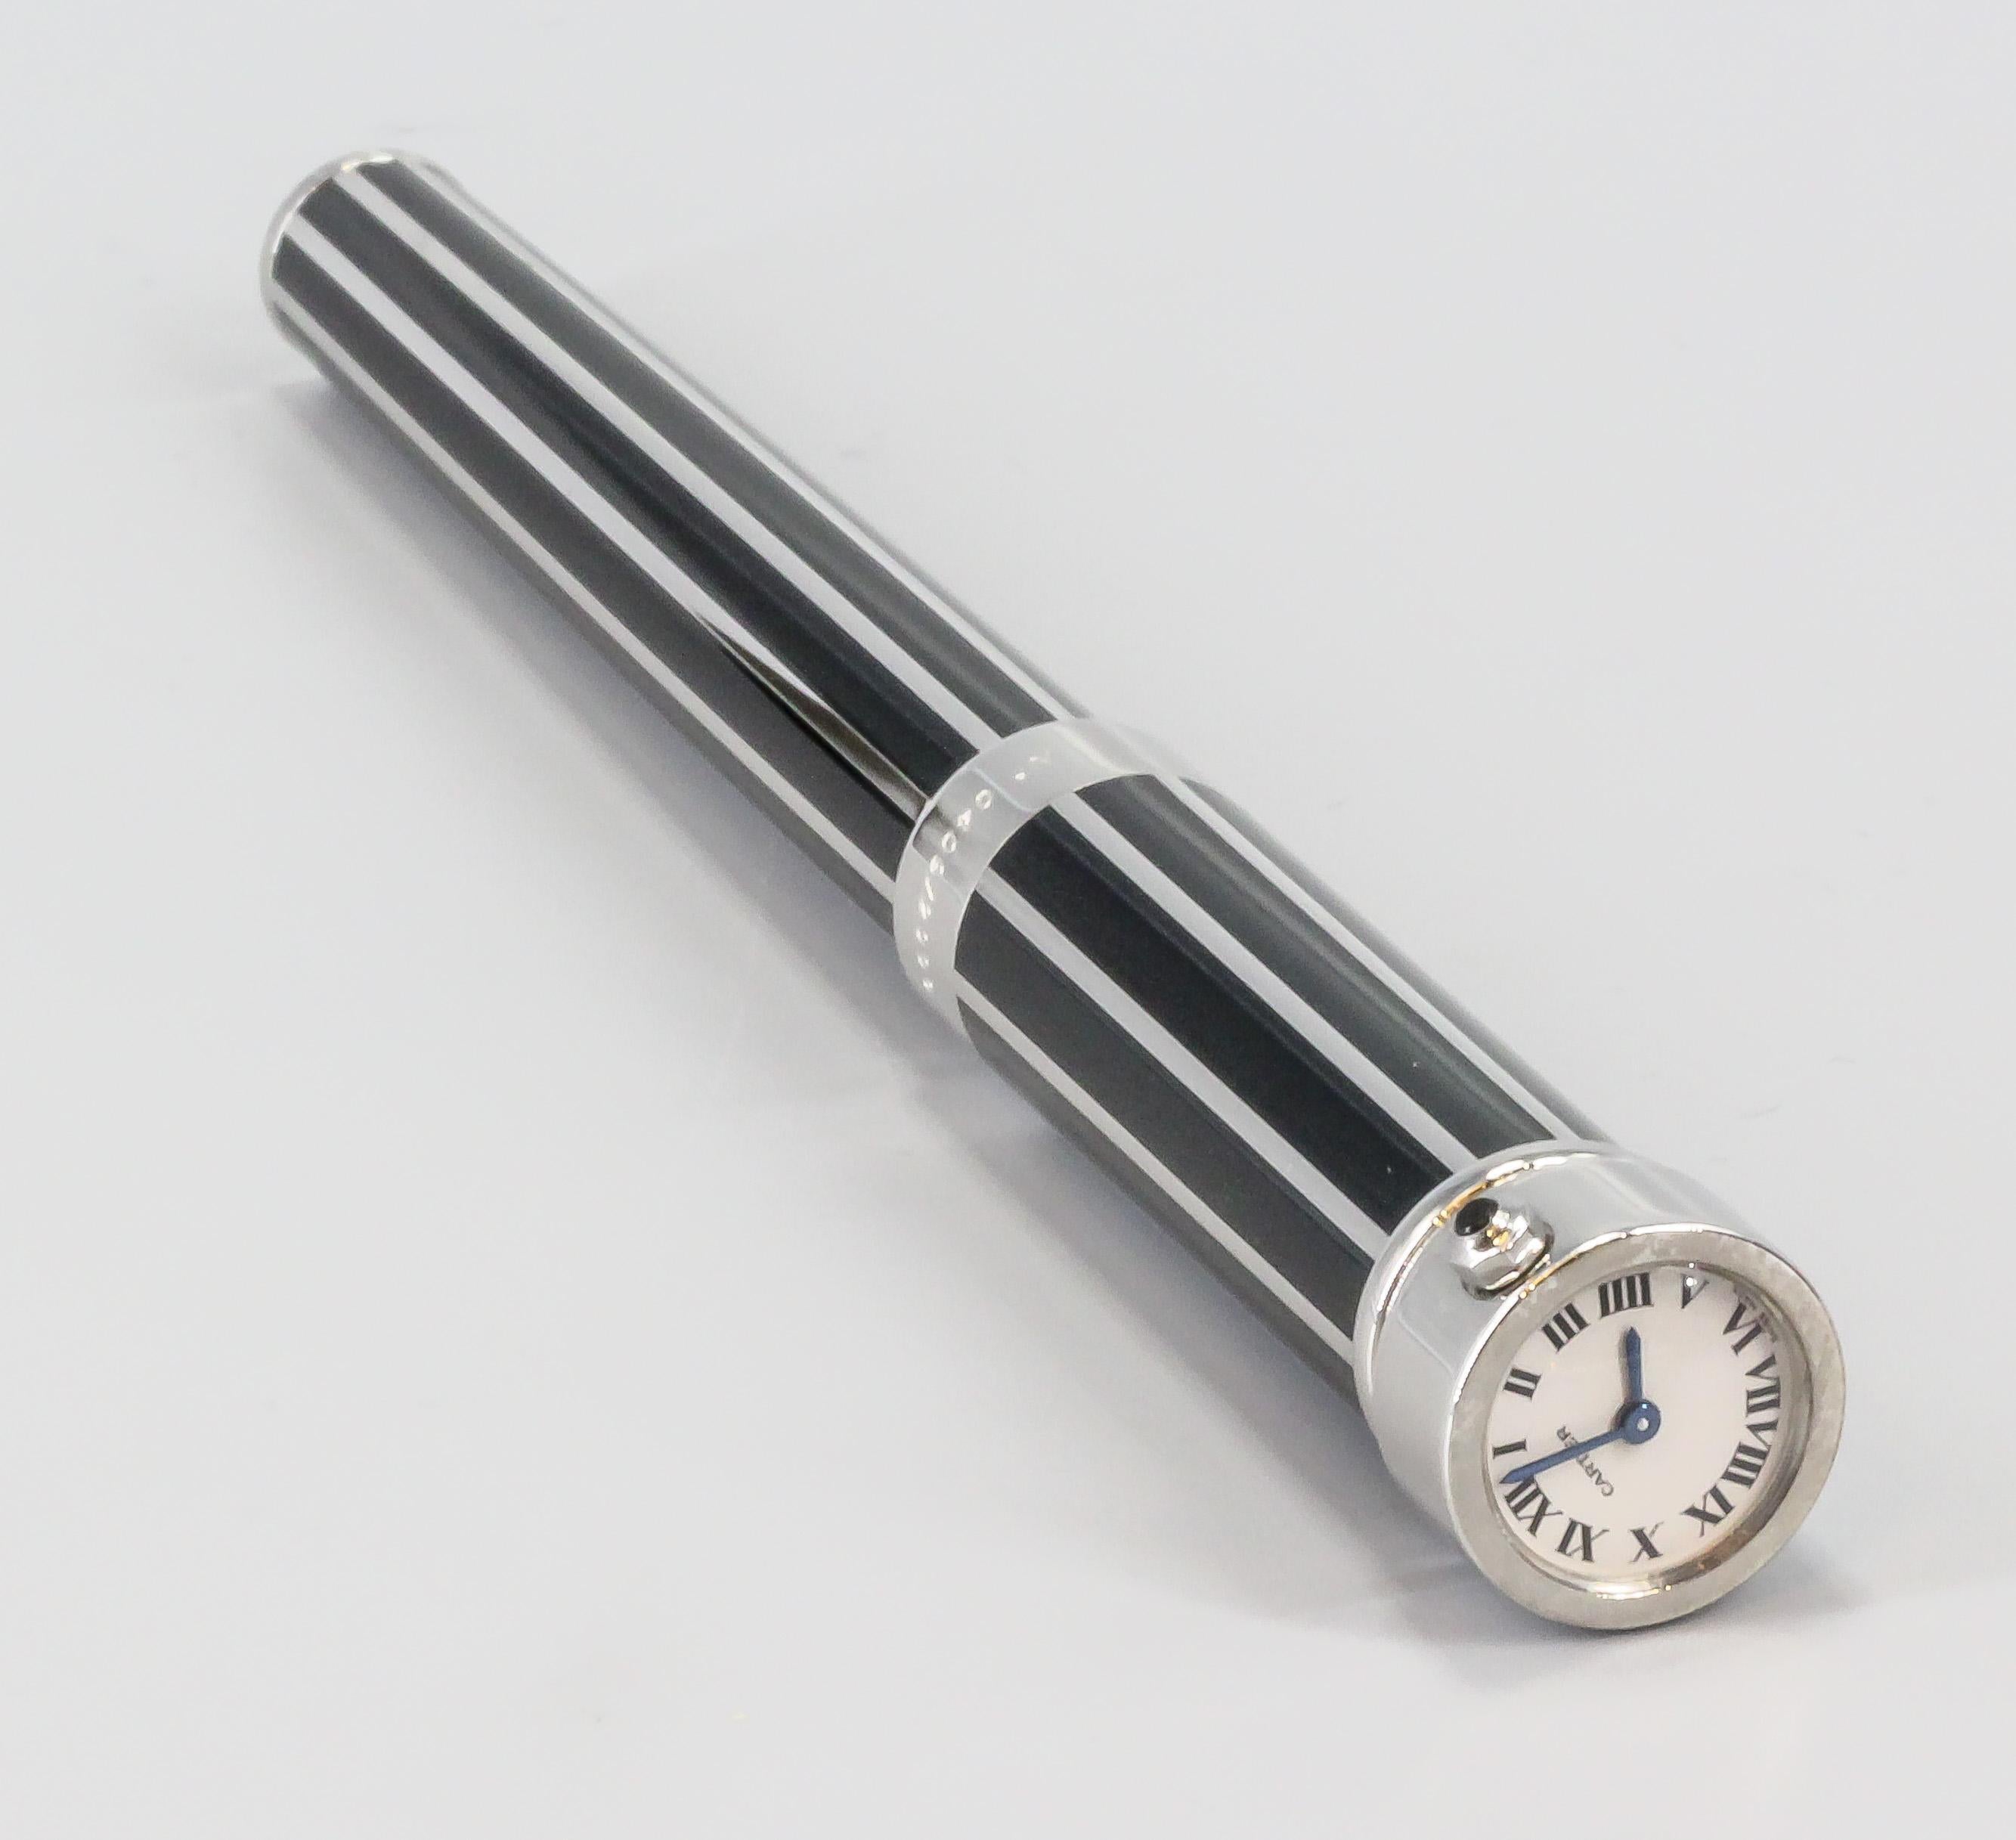 Introducing the epitome of elegance and innovation, the Cartier Limited Edition Fountain Pen Watch - a true marvel that seamlessly blends the art of fine watchmaking with the timeless allure of a luxurious fountain pen. This exclusive piece is a